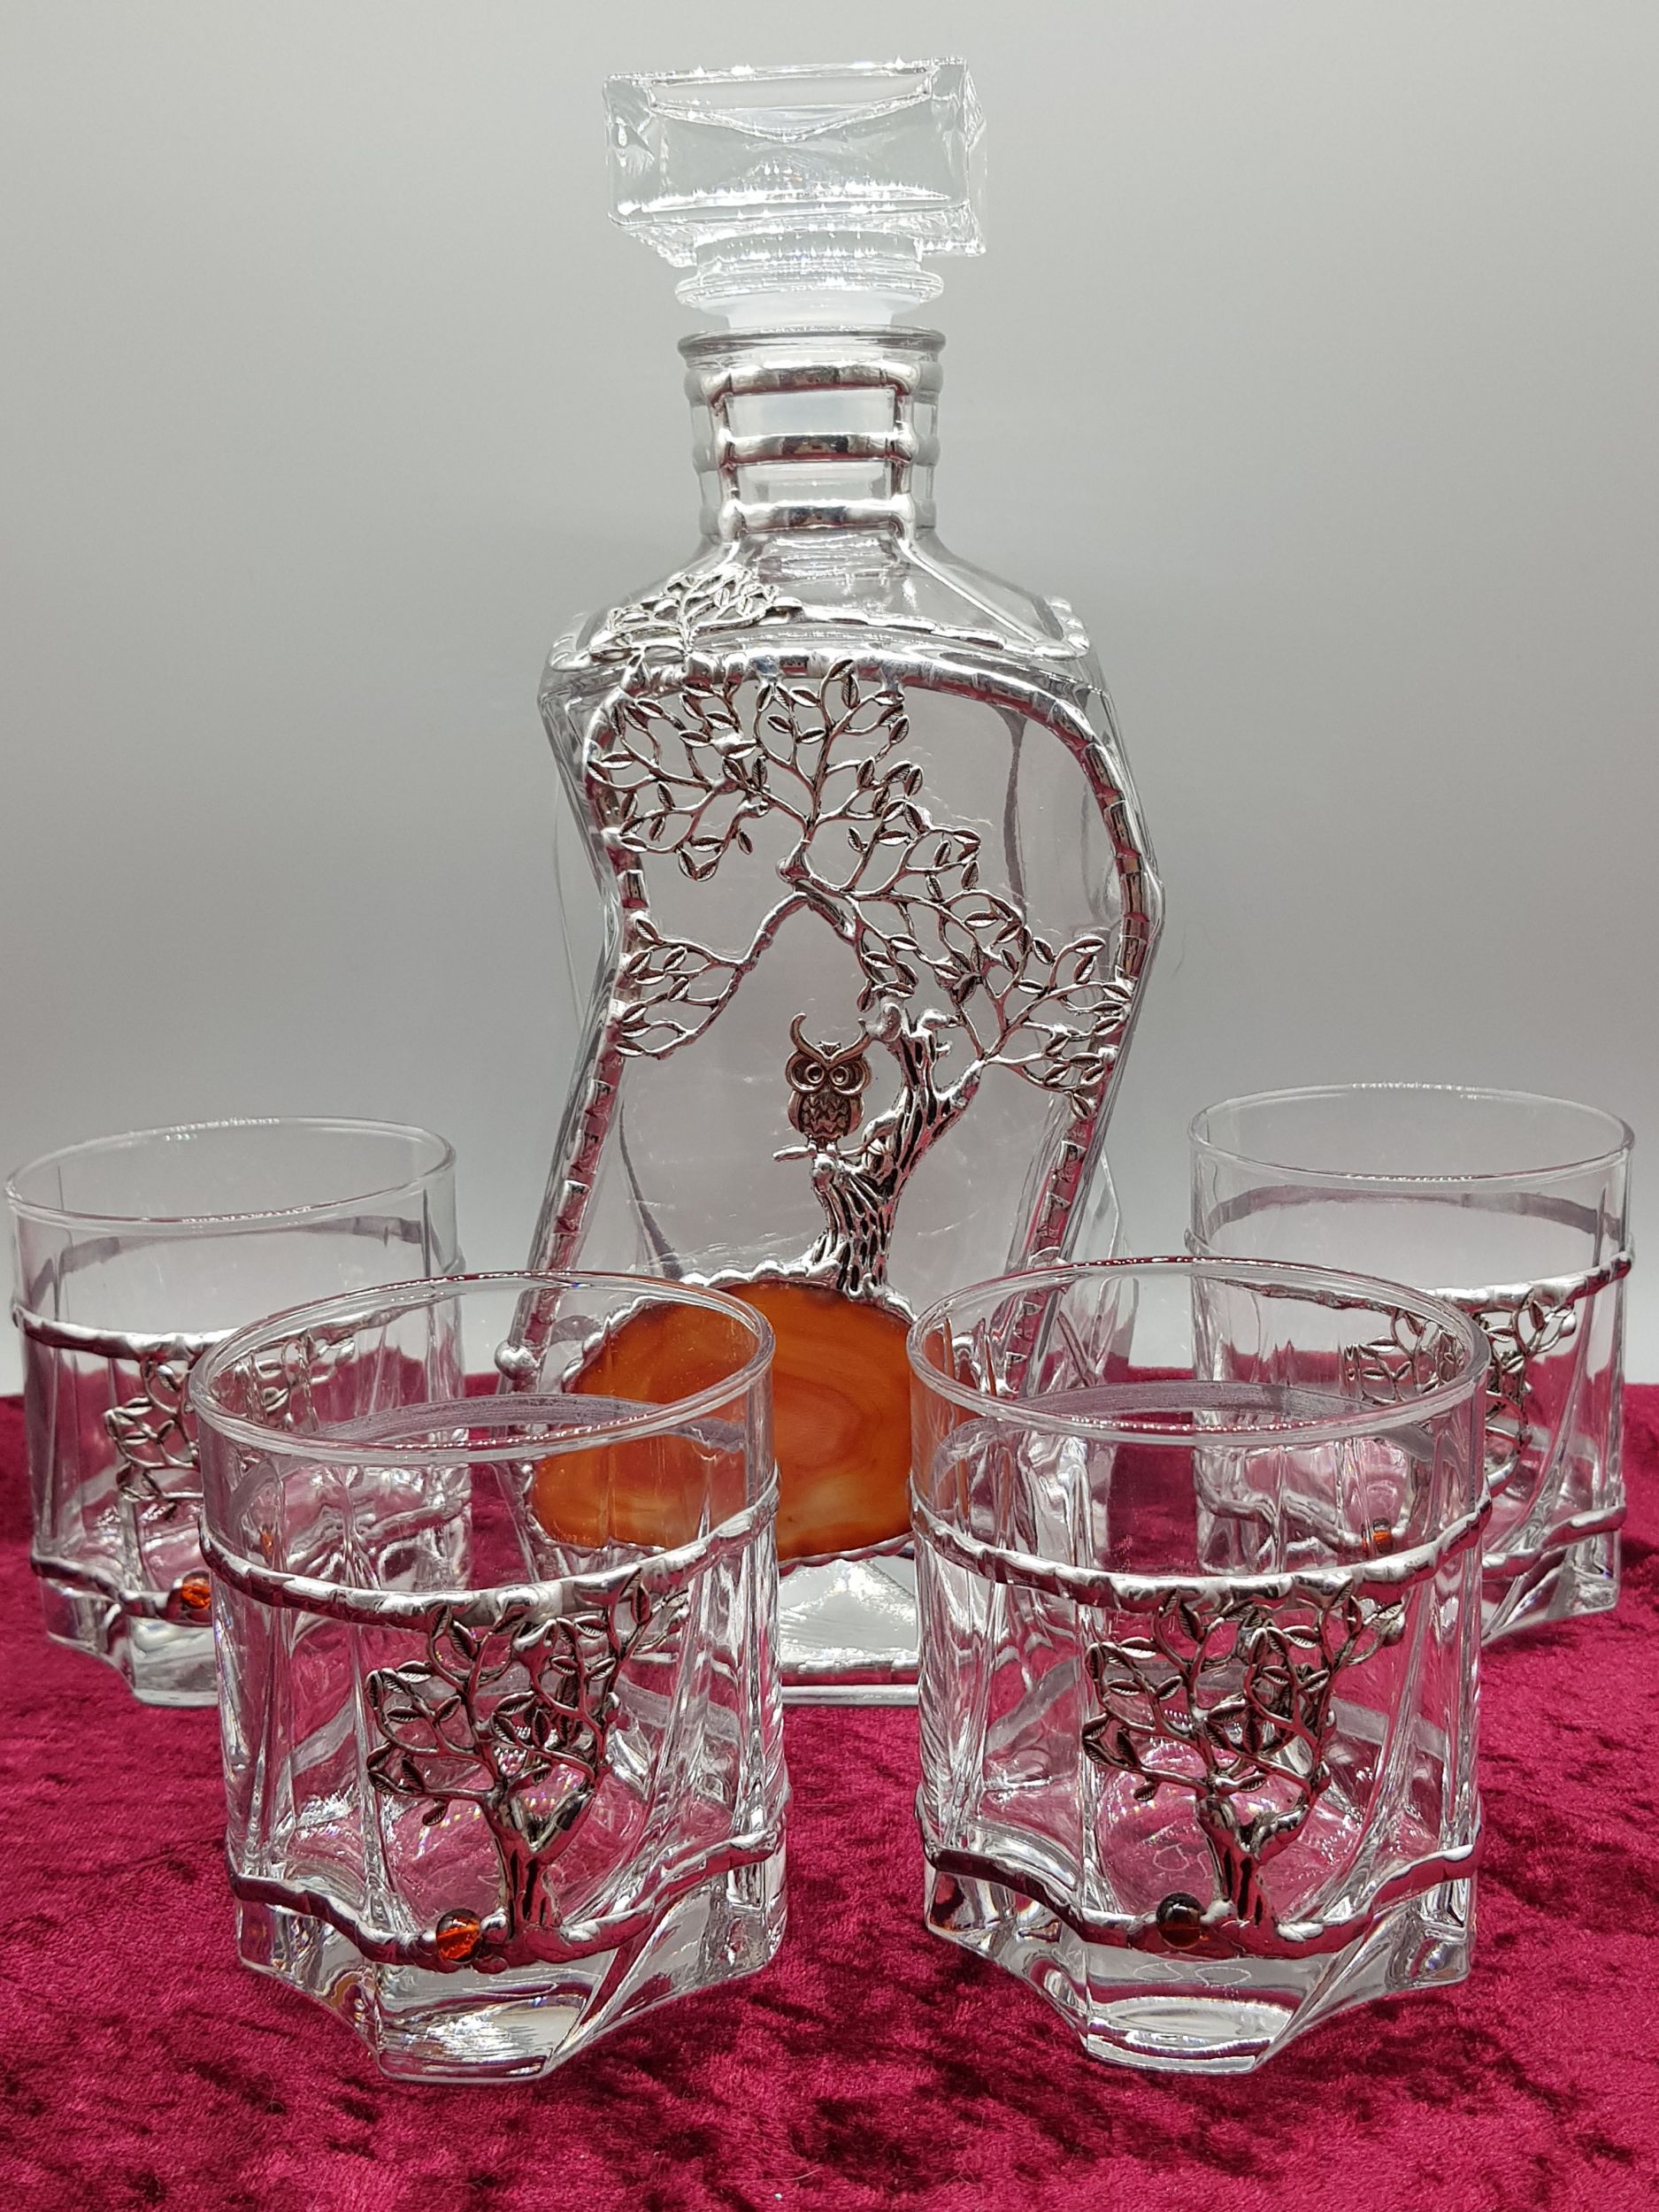 FOUR WHISKY GLASSES AND DECANTER SOLD!!!!â!!!!